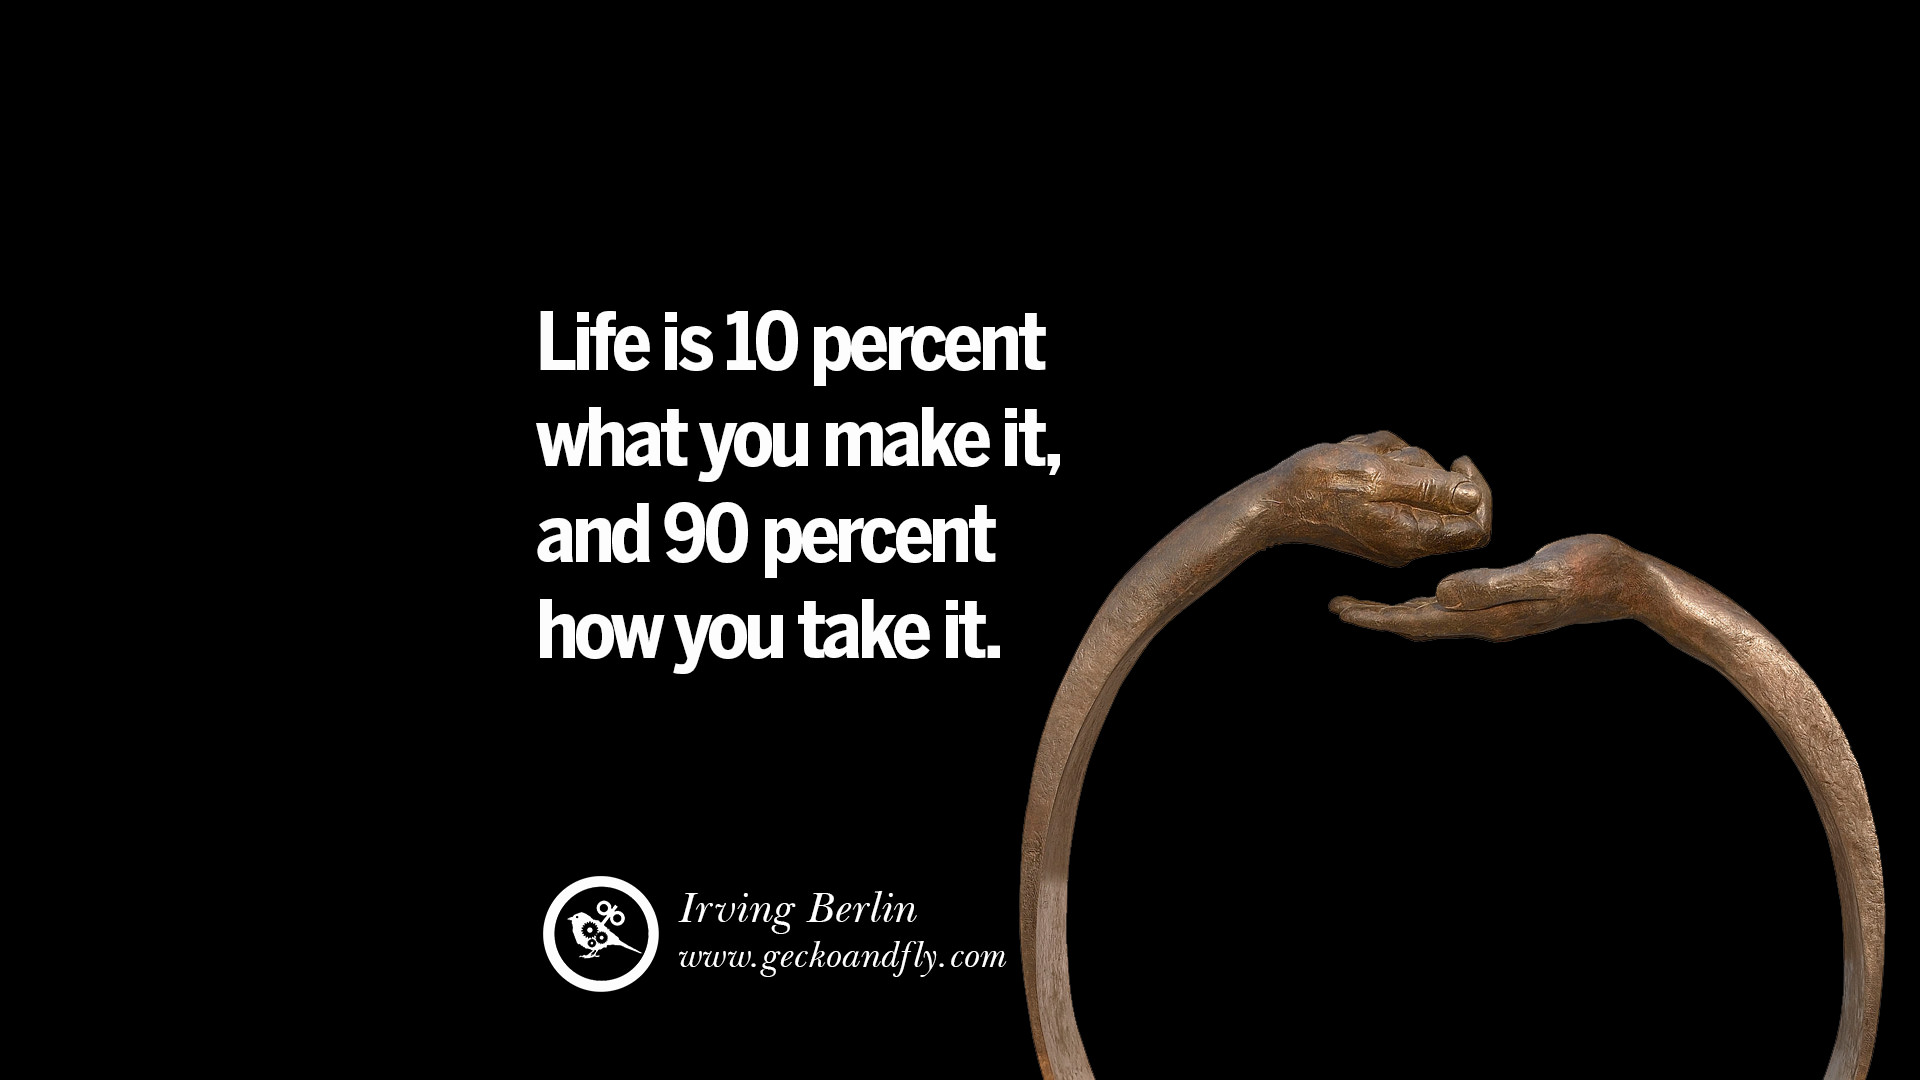 Life is 10 percent what you make it and 90 percent how you take it – Irving Berlin Inspiring Quotes